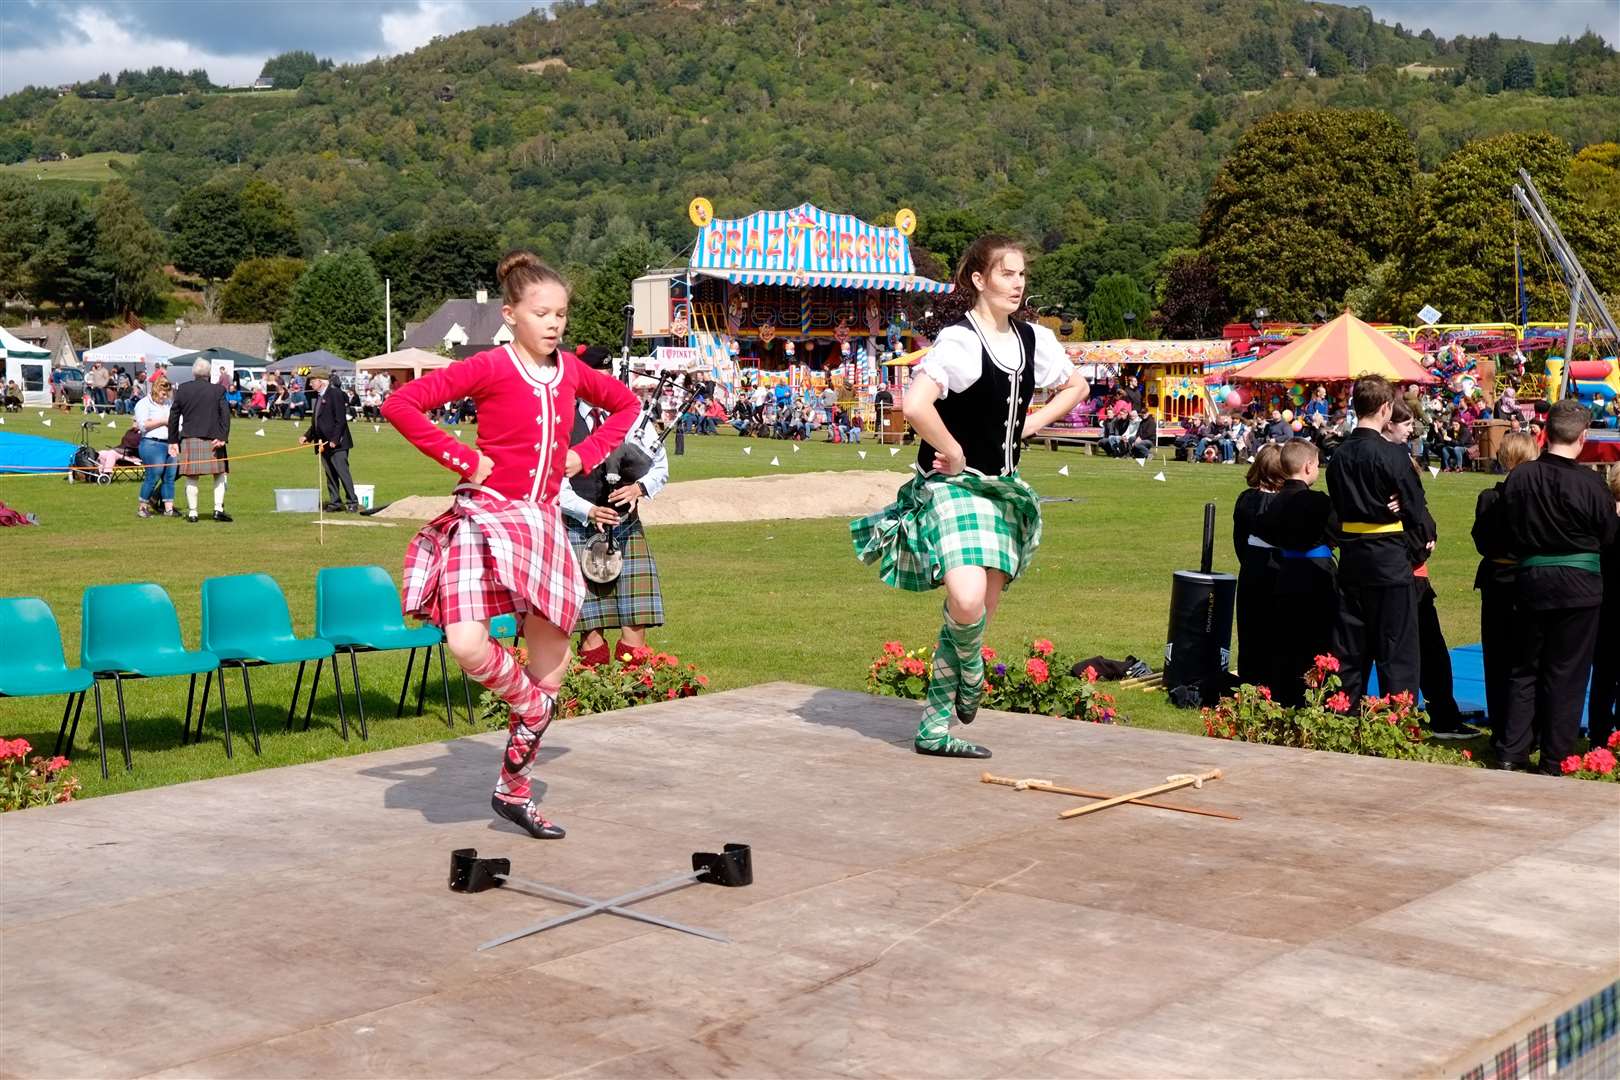 There will be Highland dancing displays throughout the day. Picture: Chris Smith